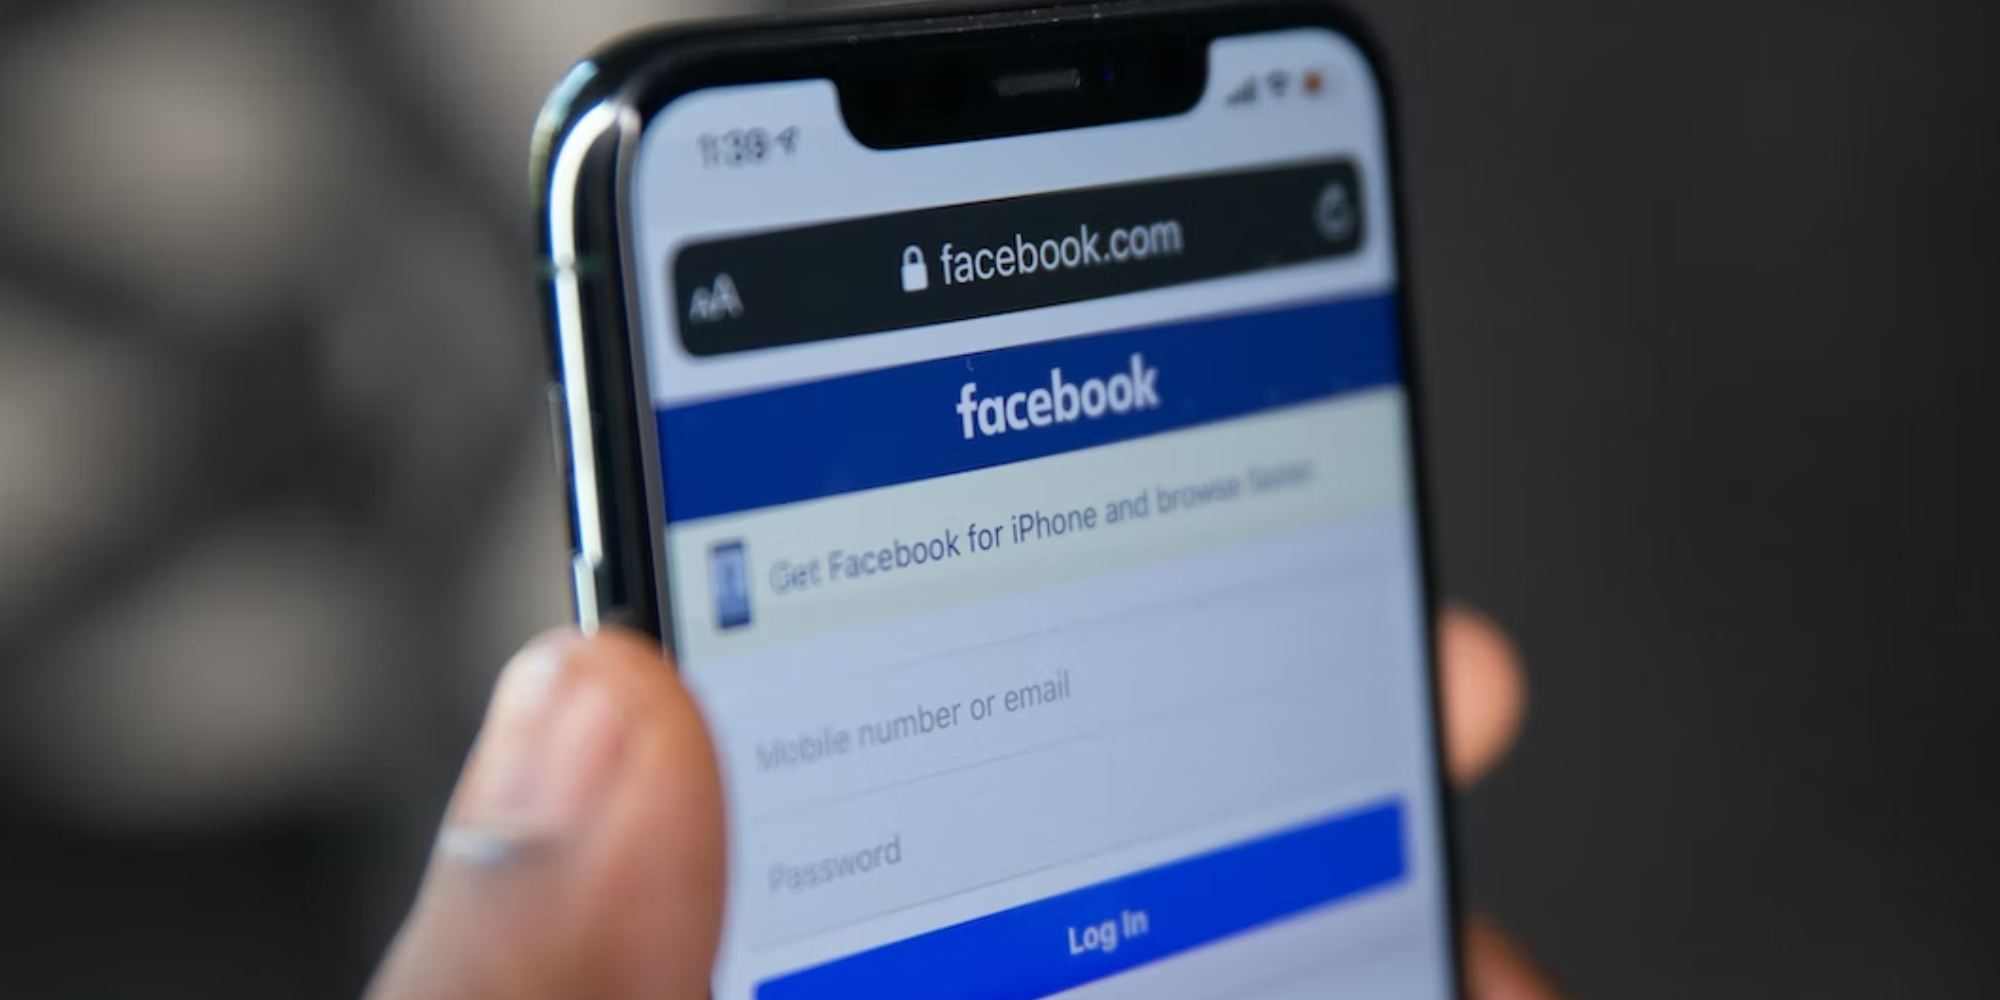 How to delete personal information from Facebook